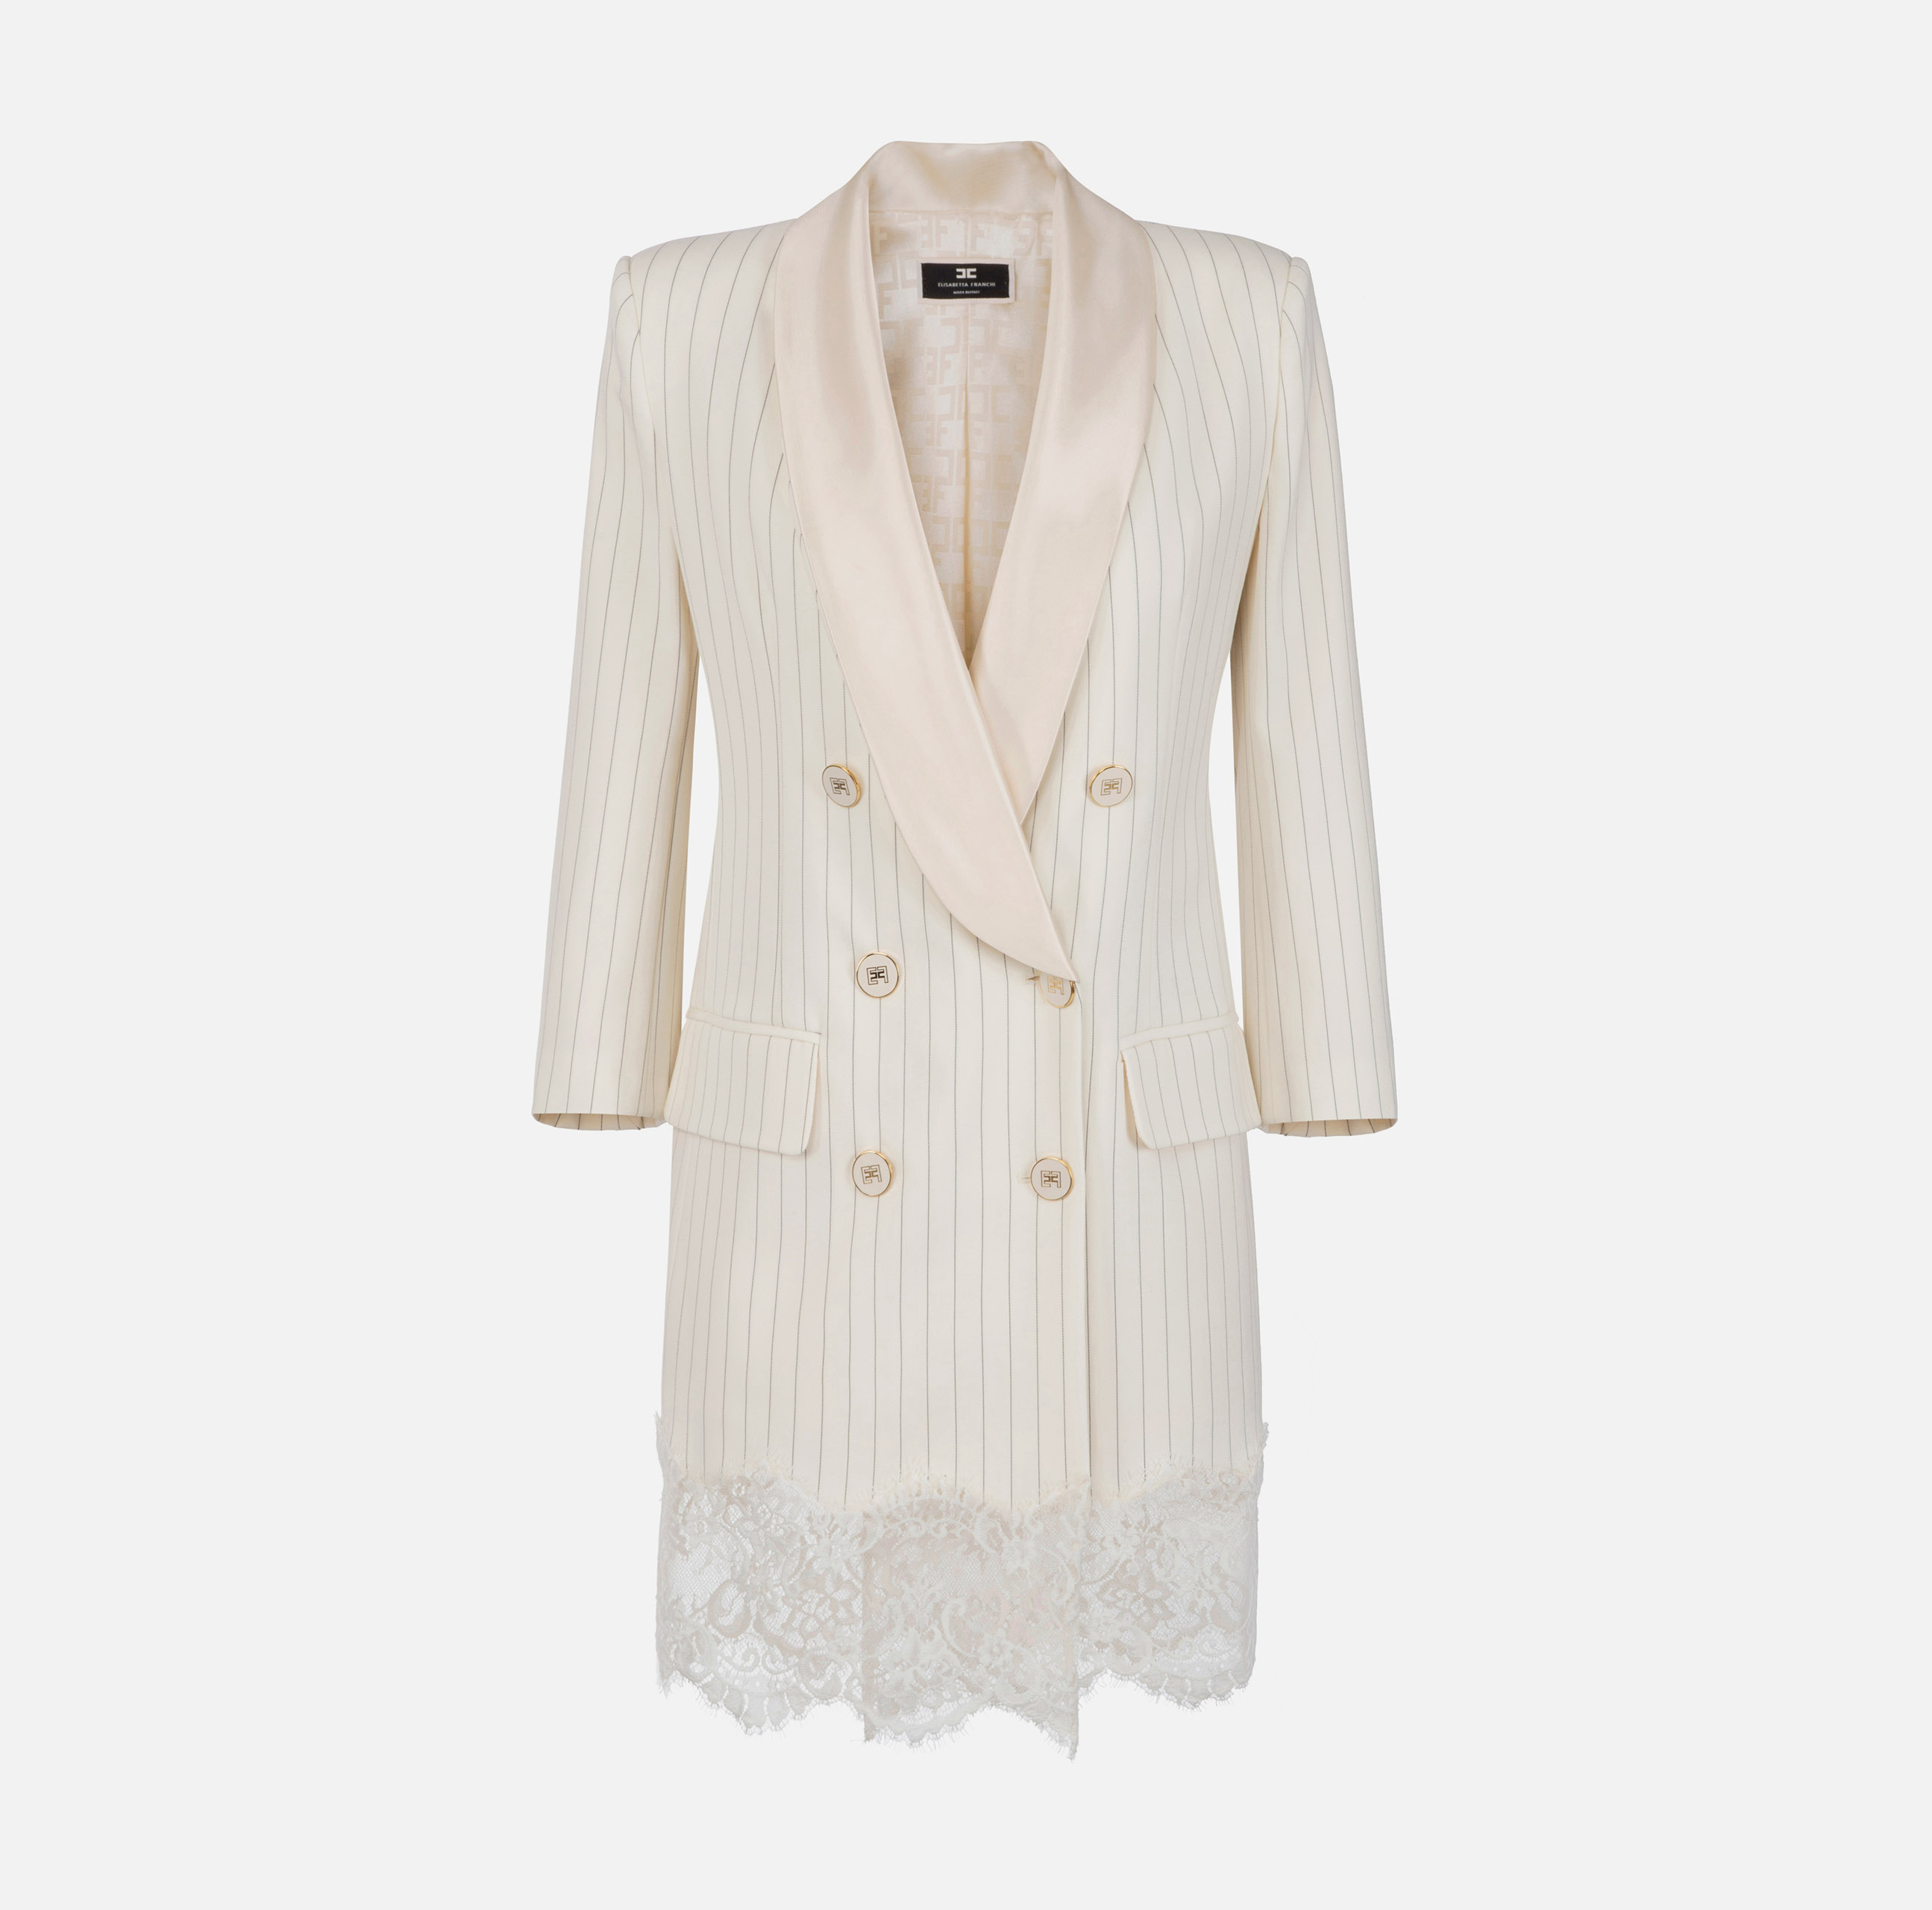 Coat dress in cool wool with lace - Elisabetta Franchi